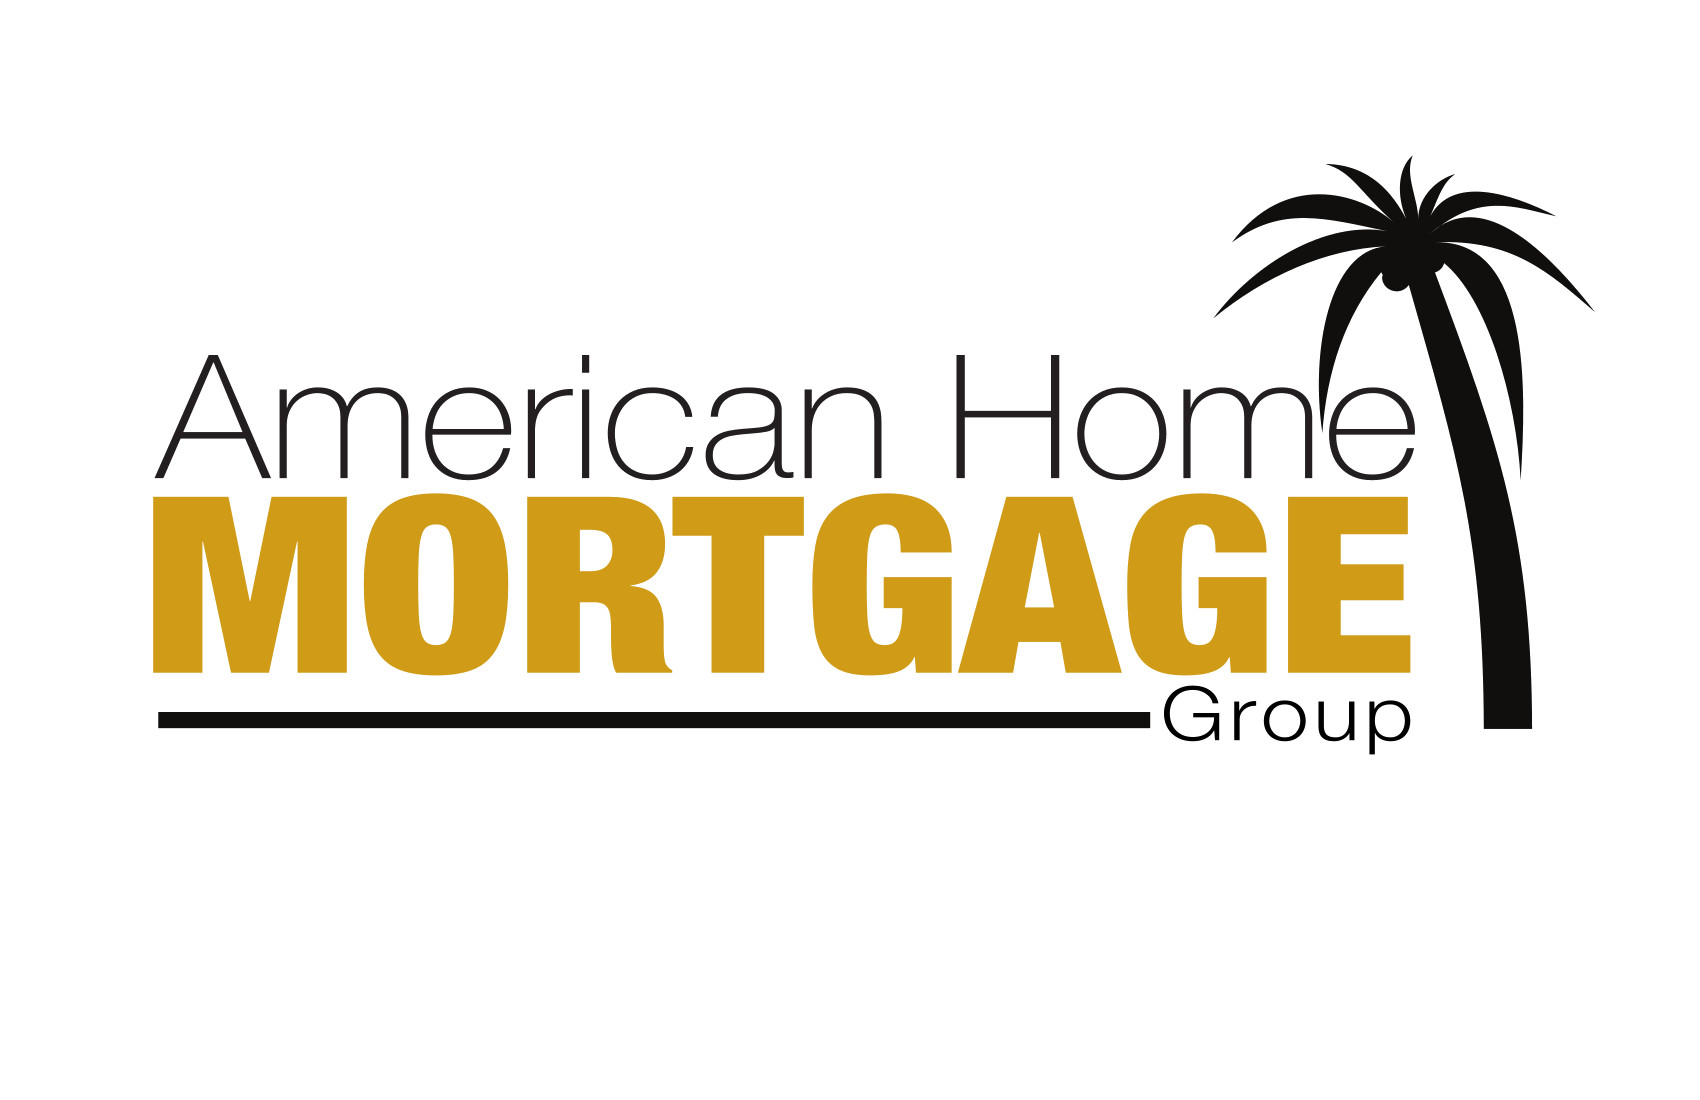 American Home Mortgage Group 408 S Central Ave, Flagler Beach Florida 32136